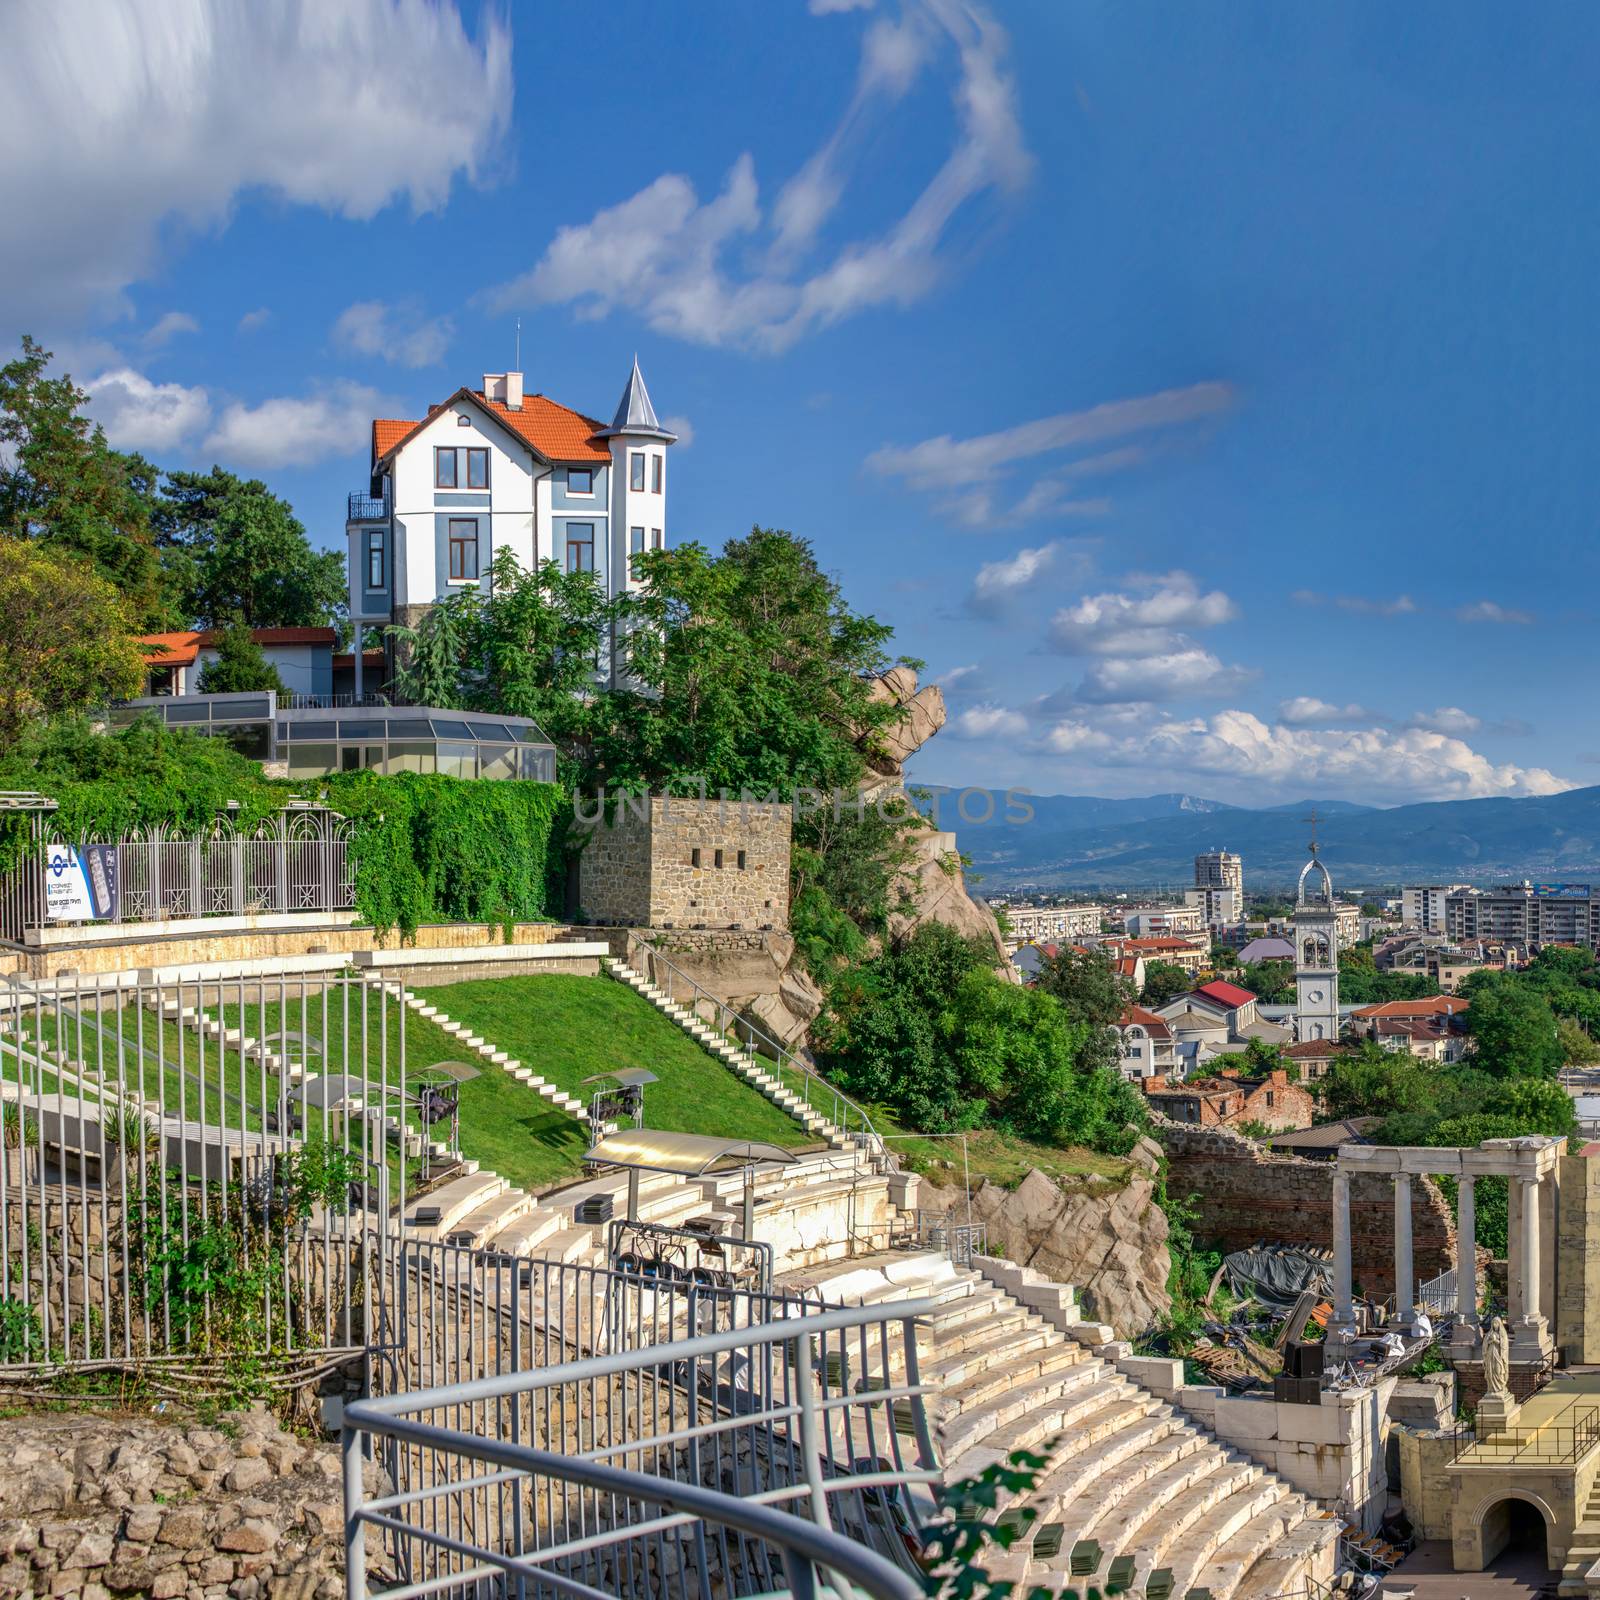 Plovdiv, Bulgaria - 07.24.2019. Ancient Roman amphitheater in Plovdiv, Bulgaria. Big size panoramic view on a sunny summer day